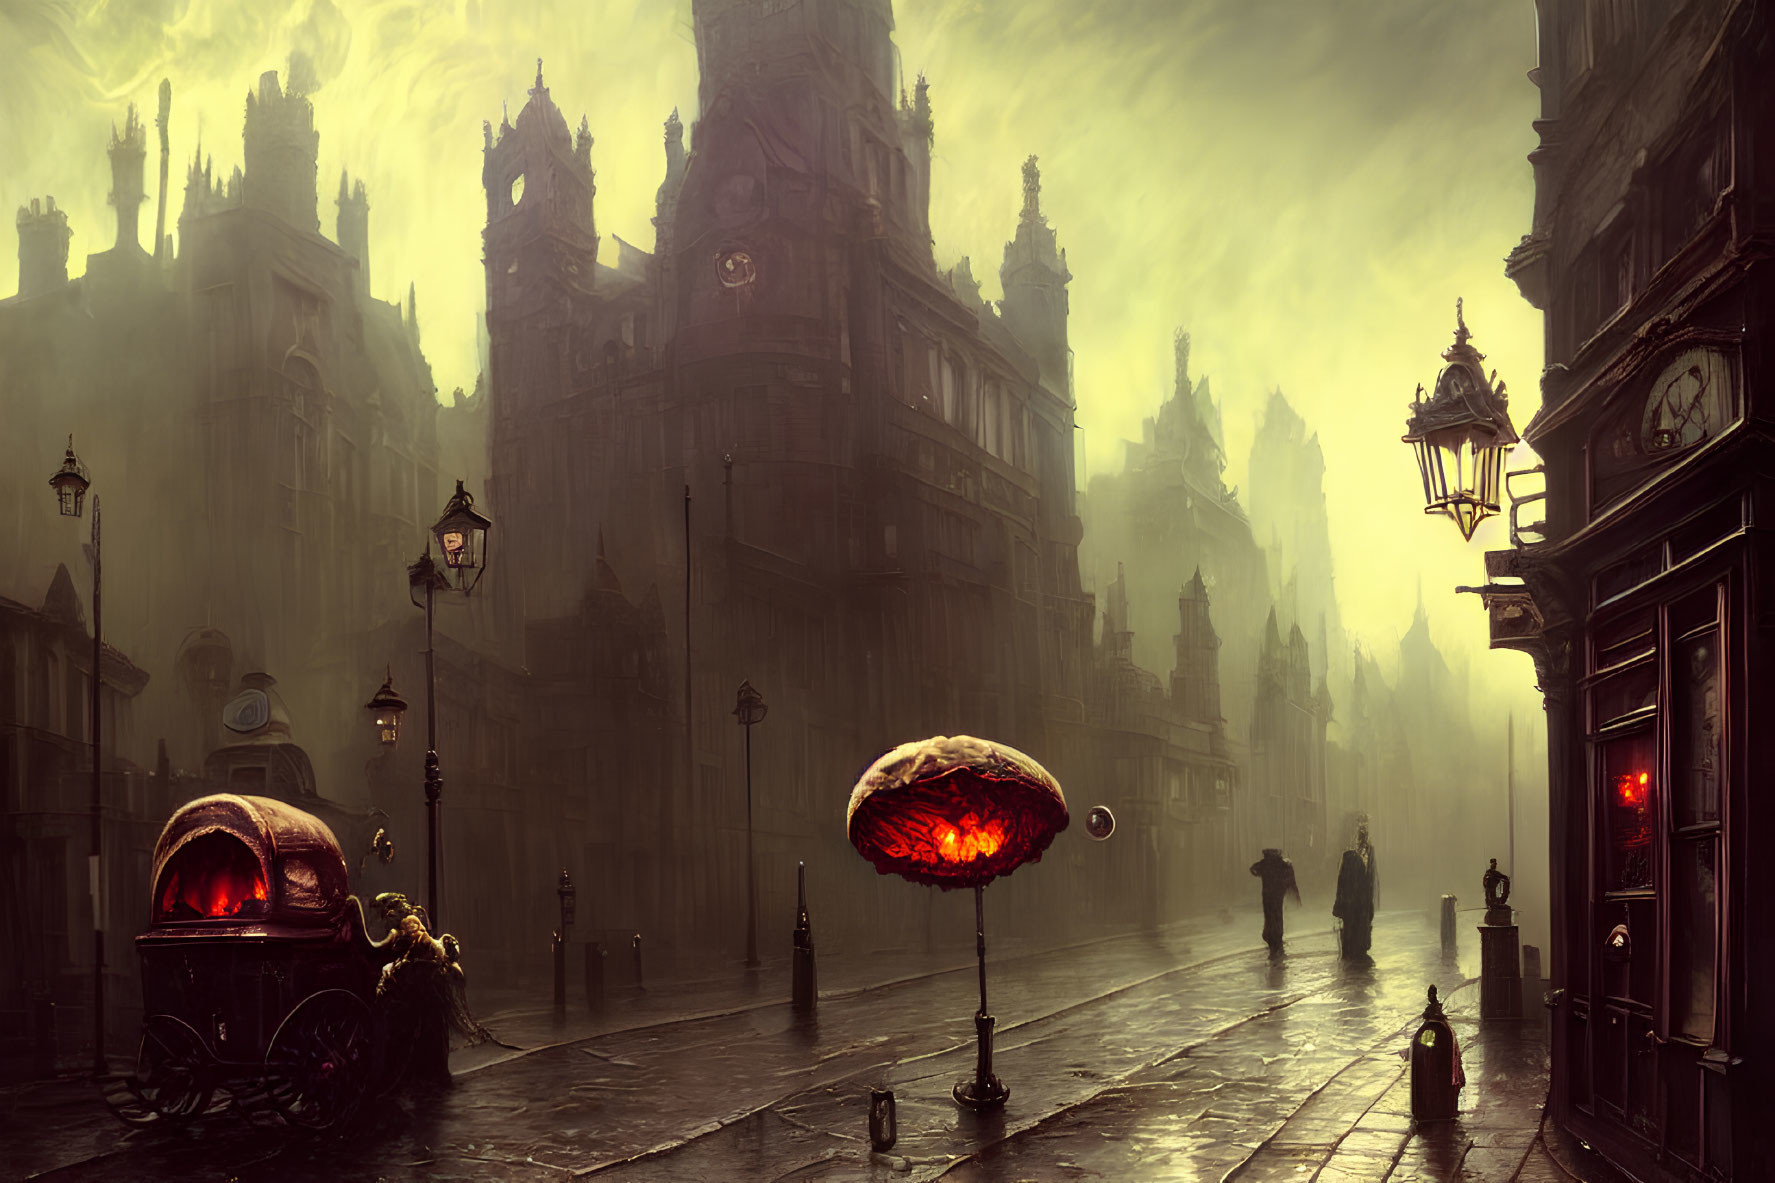 Victorian-style street scene with fog, silhouettes, glowing lamps, carriage, and eerie oversized